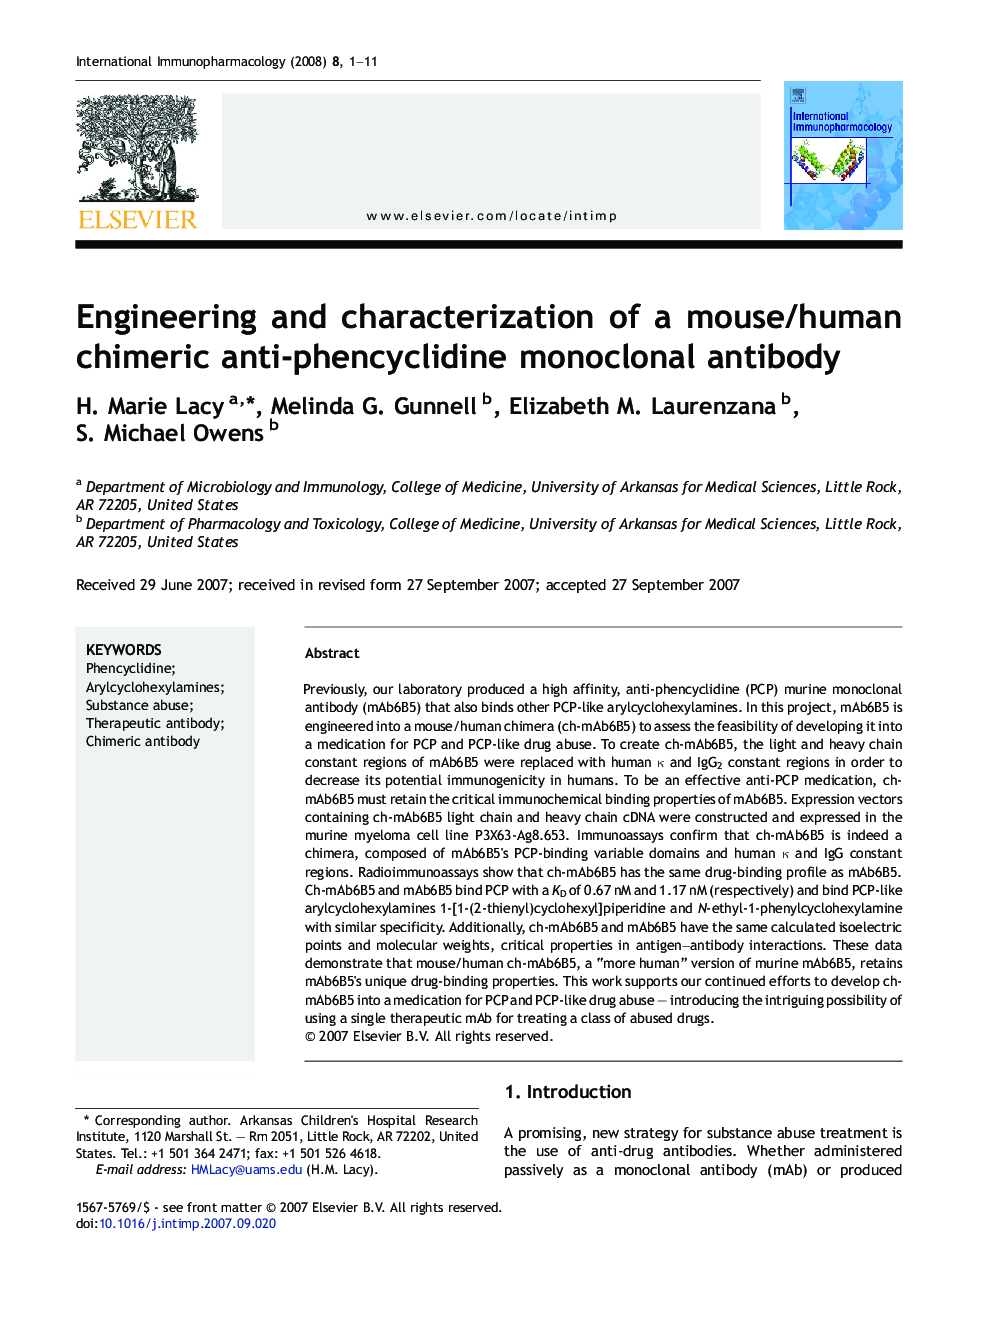 Engineering and characterization of a mouse/human chimeric anti-phencyclidine monoclonal antibody